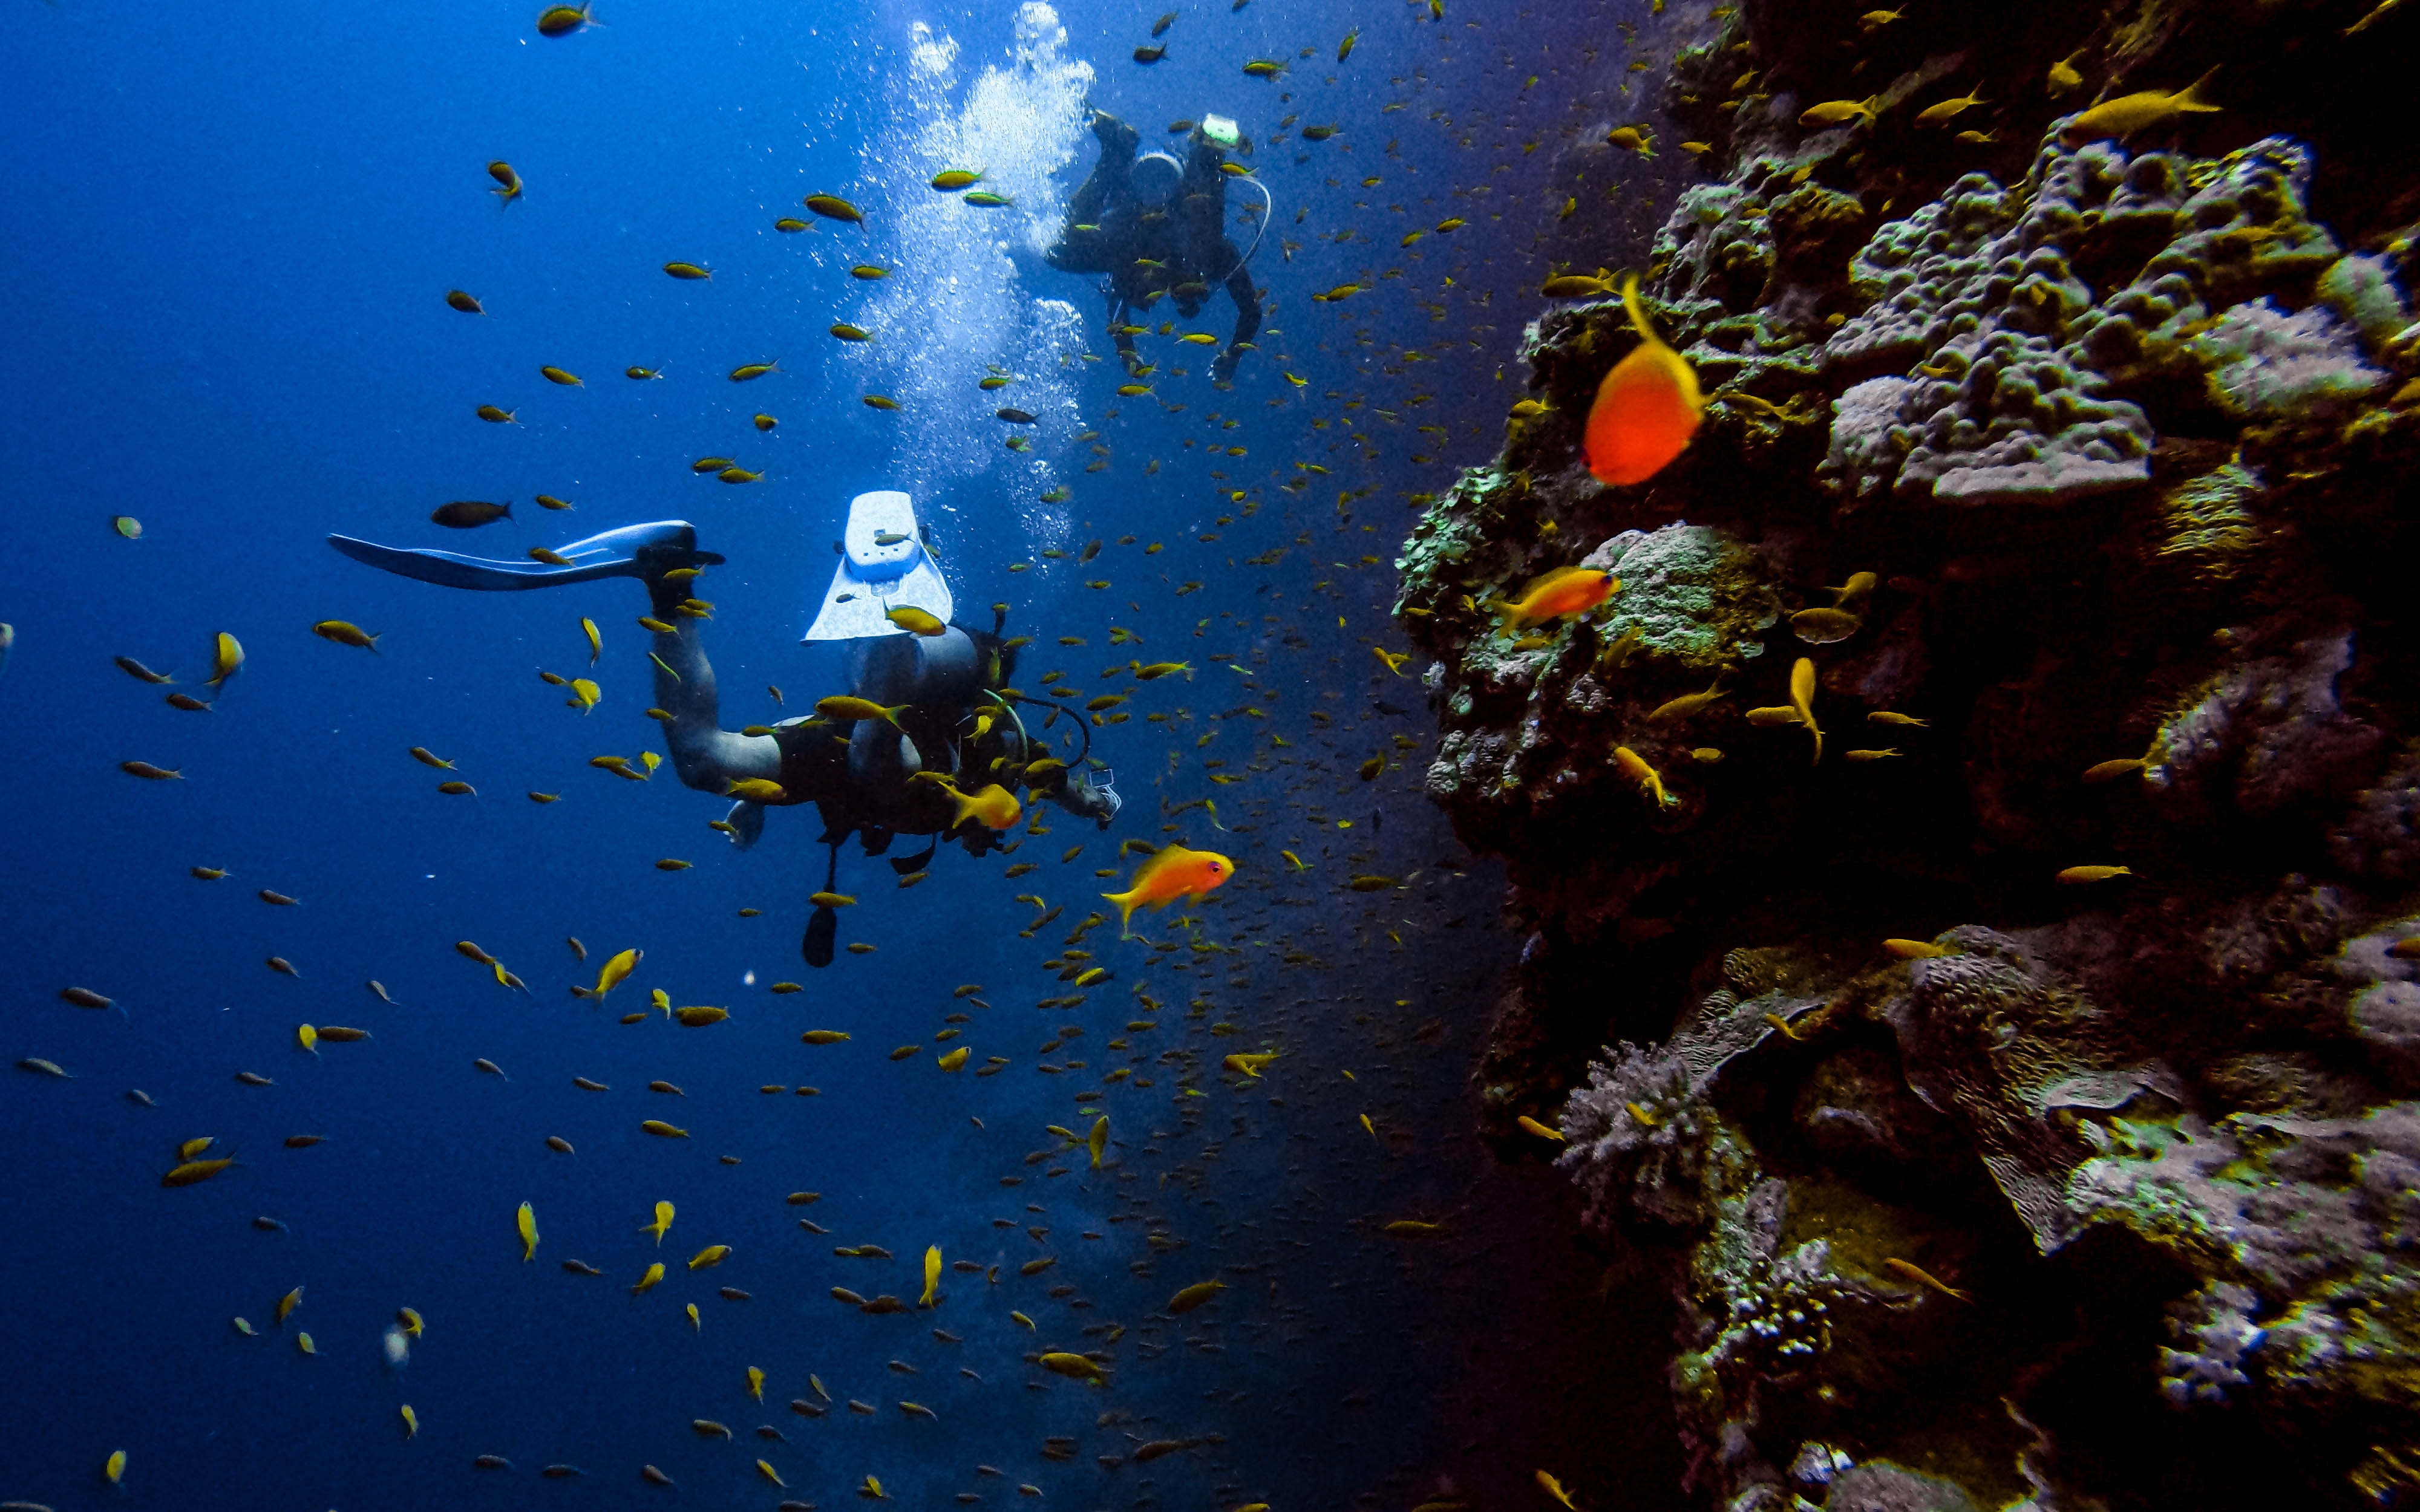 Book A Diving Course On The Pacific Ocean